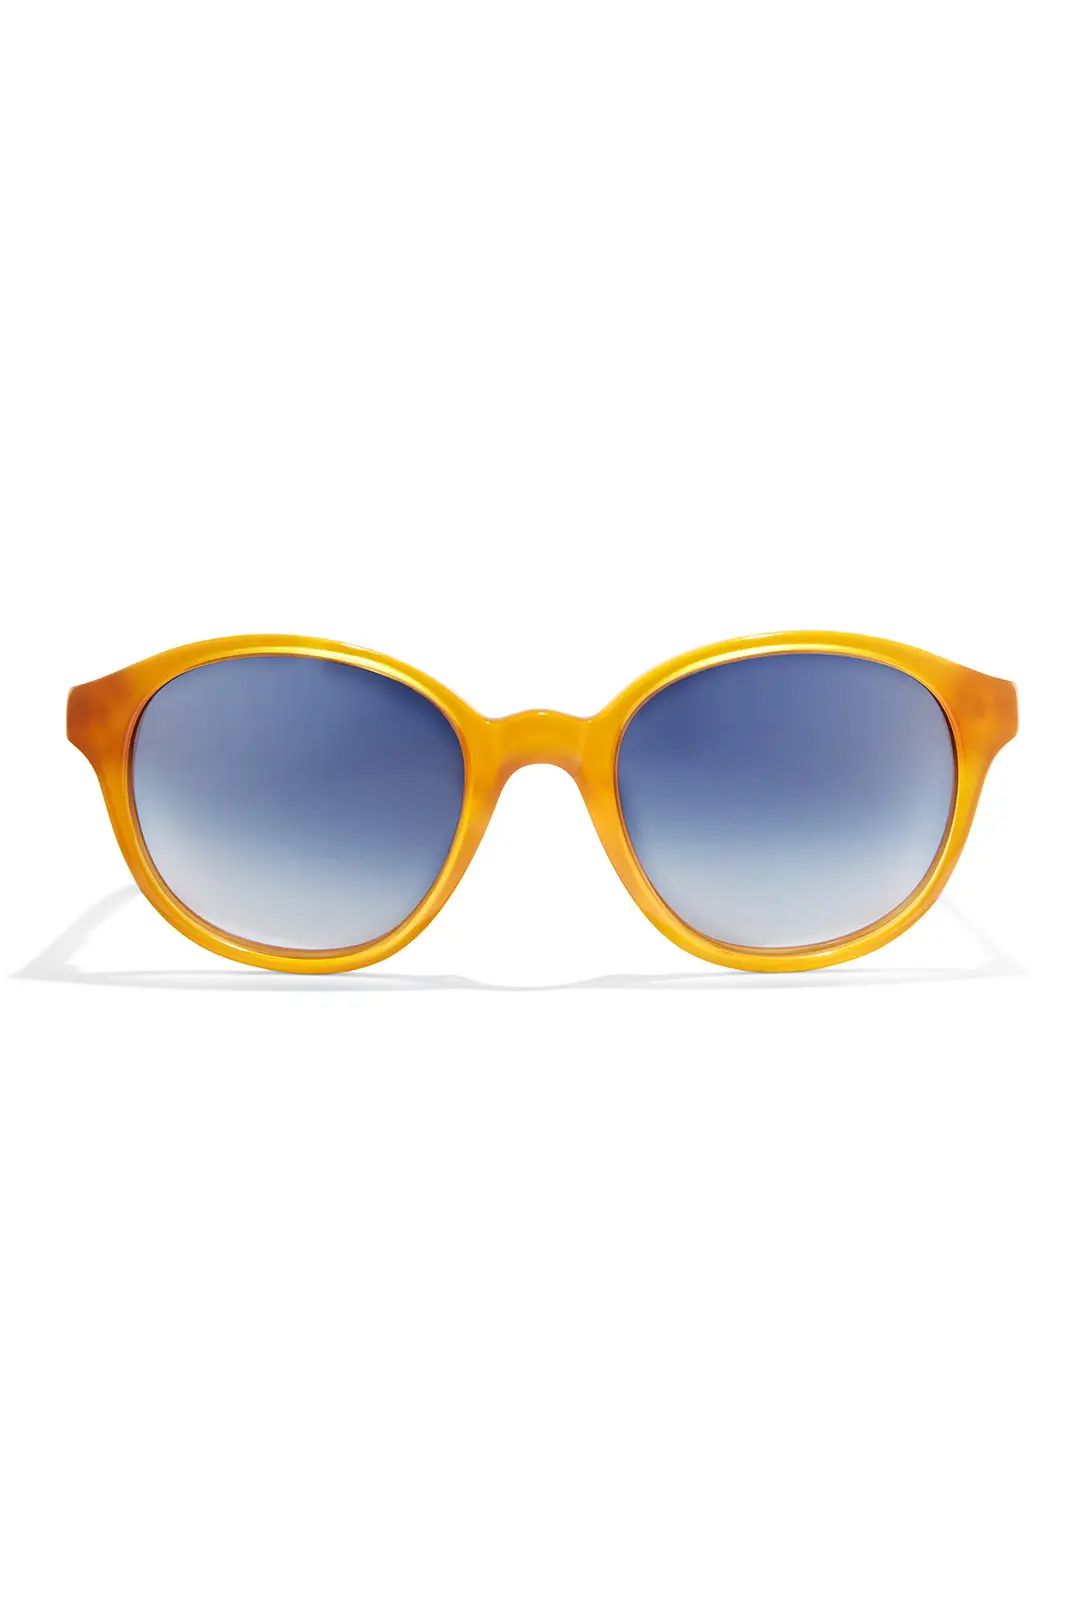 Elizabeth and James Accessories Madison Sunglasses | Rent The Runway